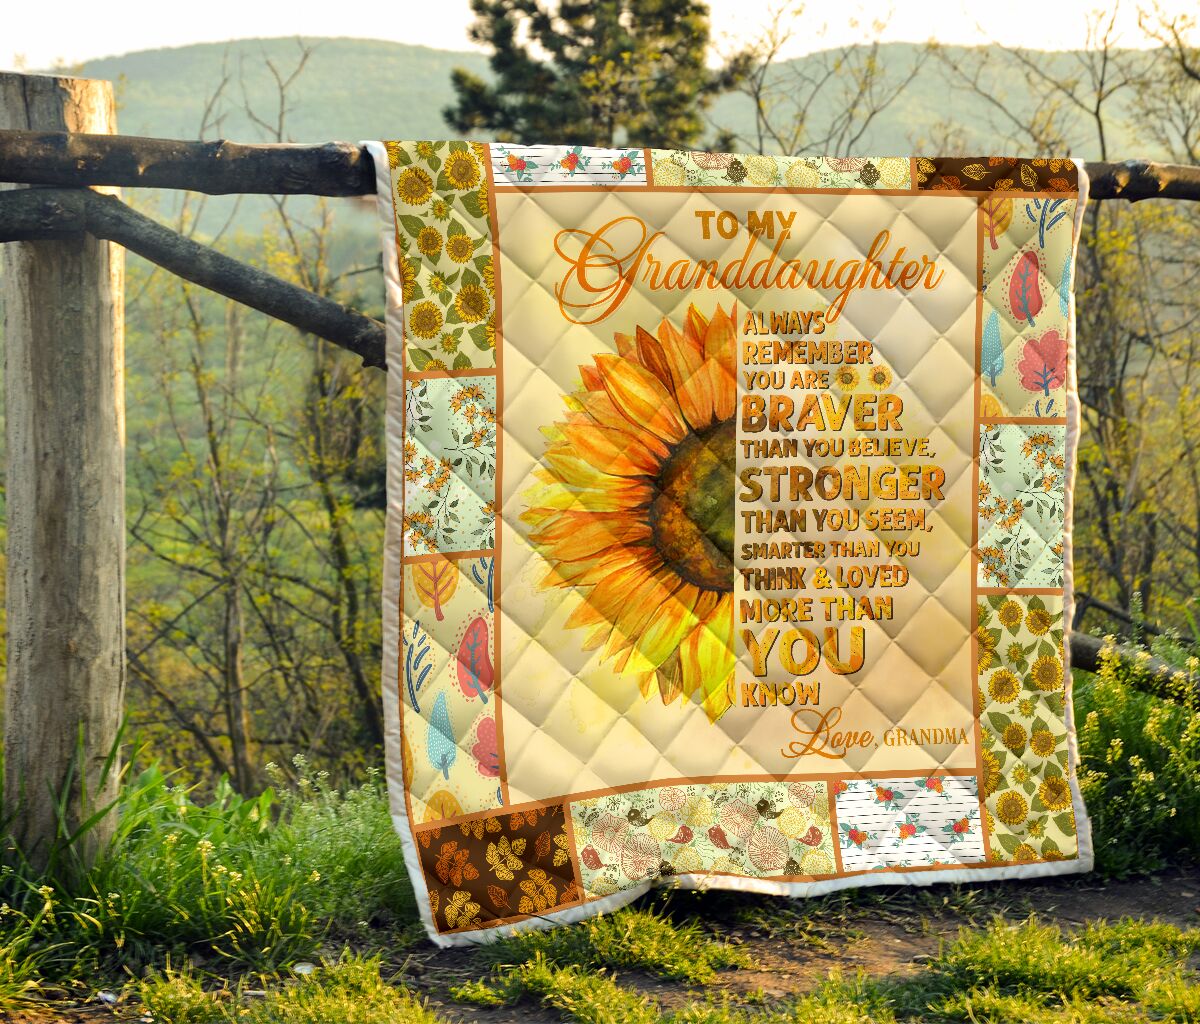 To my granddaughter always remember you are braver than you believe sunflower quilt 3